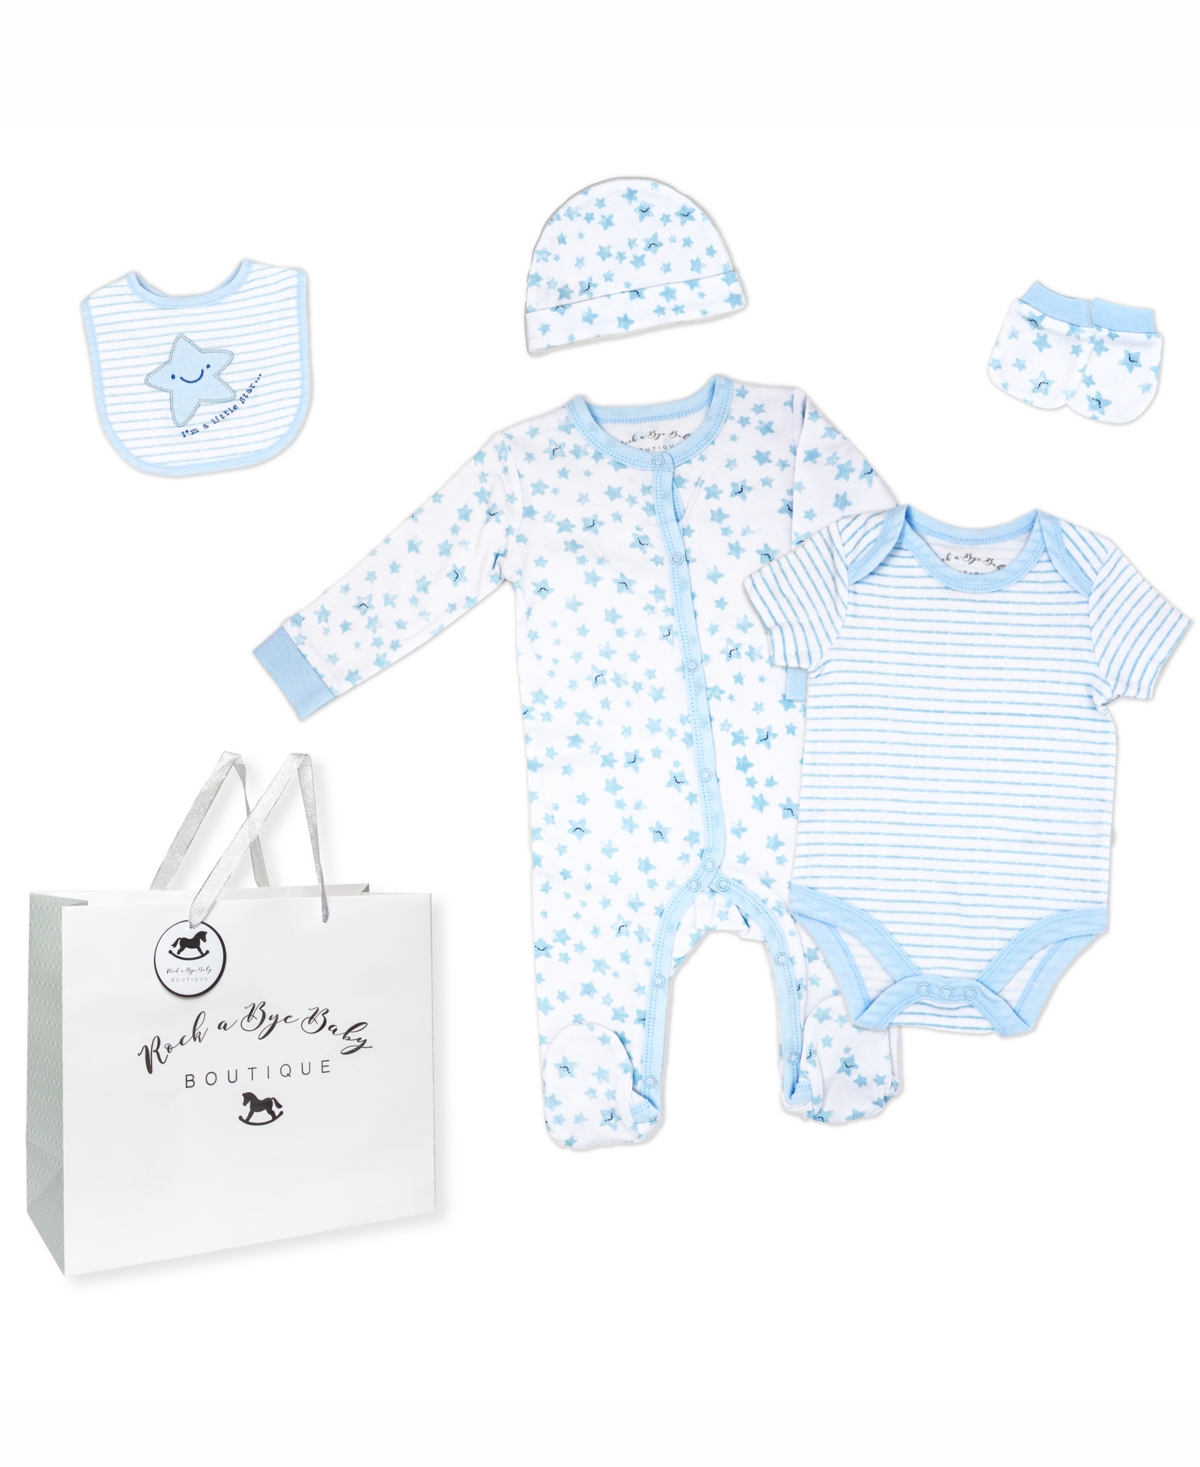 Rock-a-bye Baby Boutique Baby Boys Layette Gift Bag Set In I'm A Star